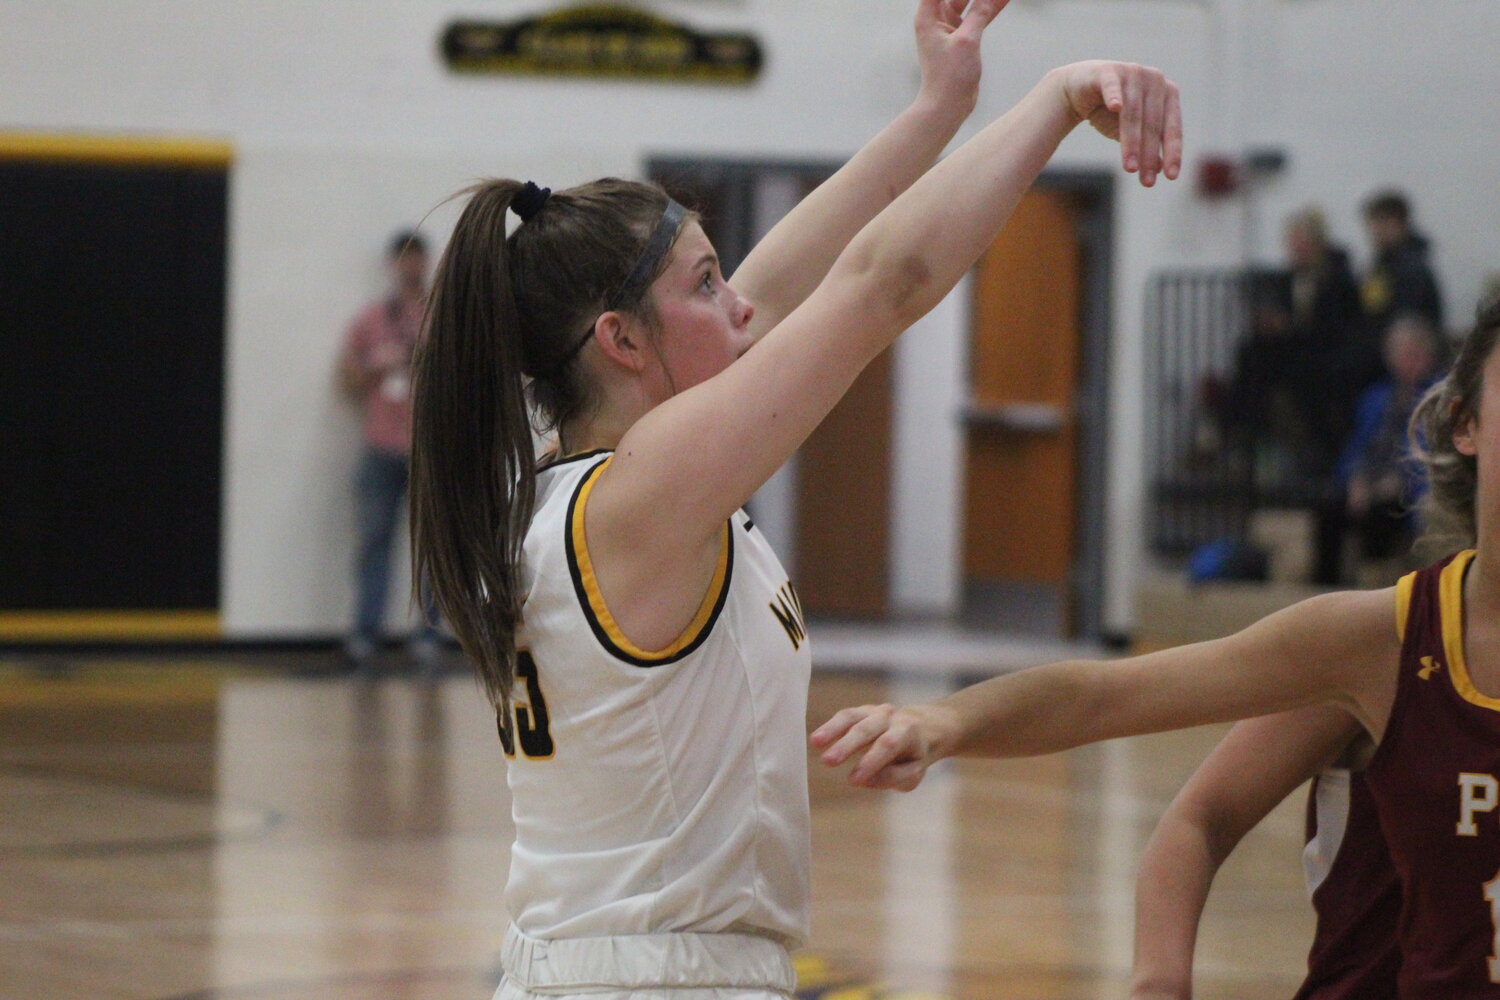 In addition to being a strong defensive player, Mid-Prairie's Nora Pennington has turned into a shooter.